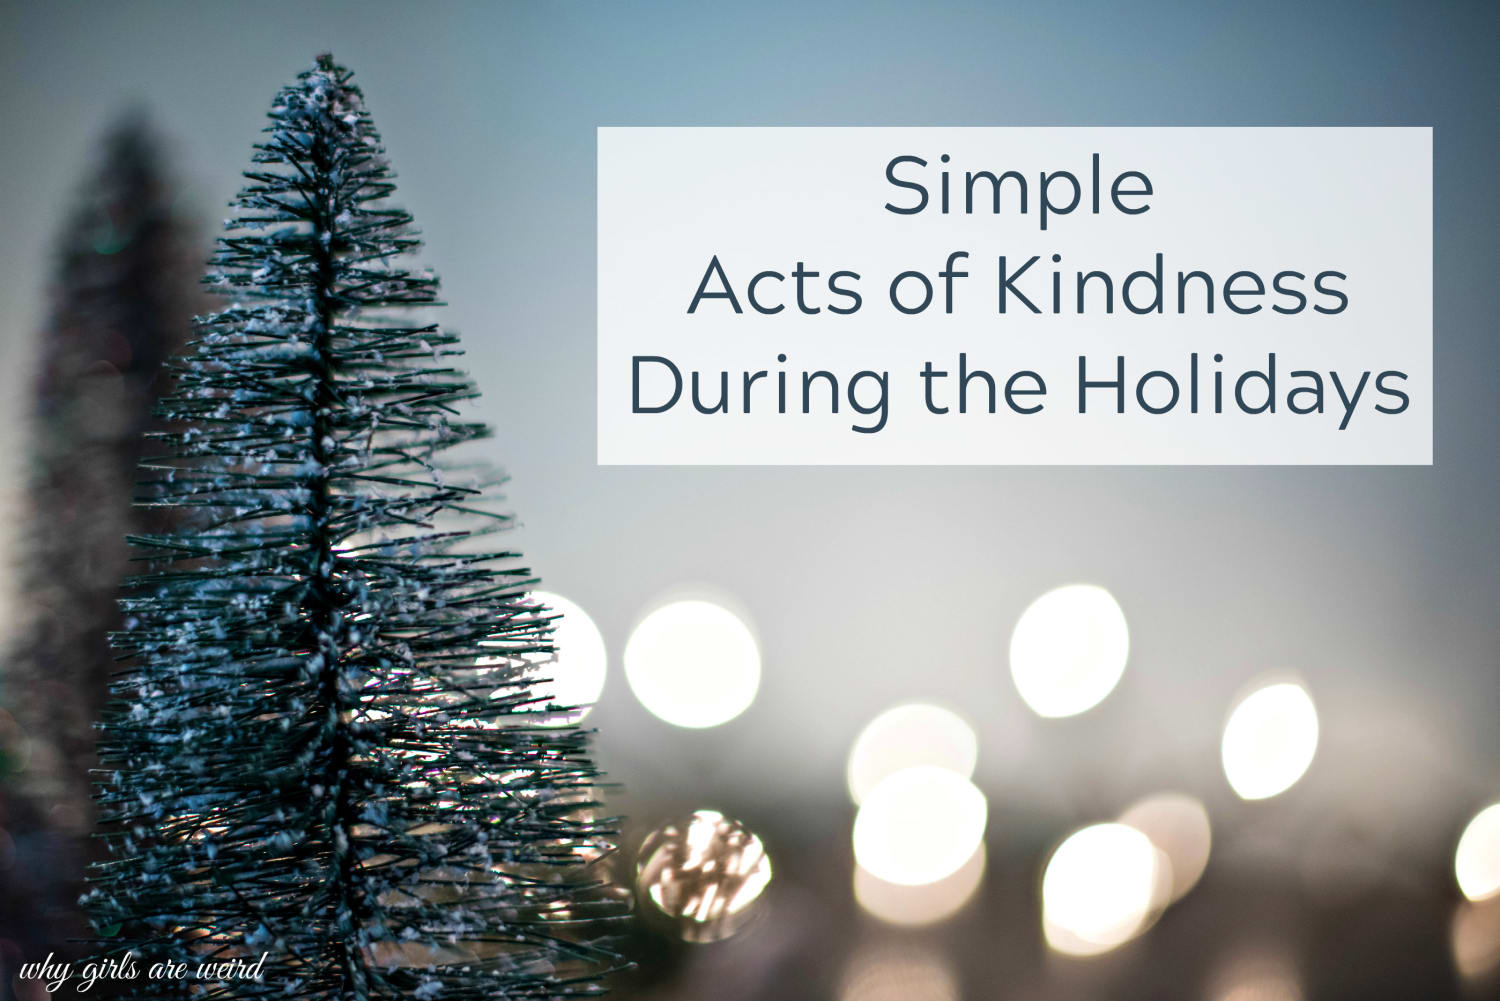 Simple Acts of Kindness During the Holidays